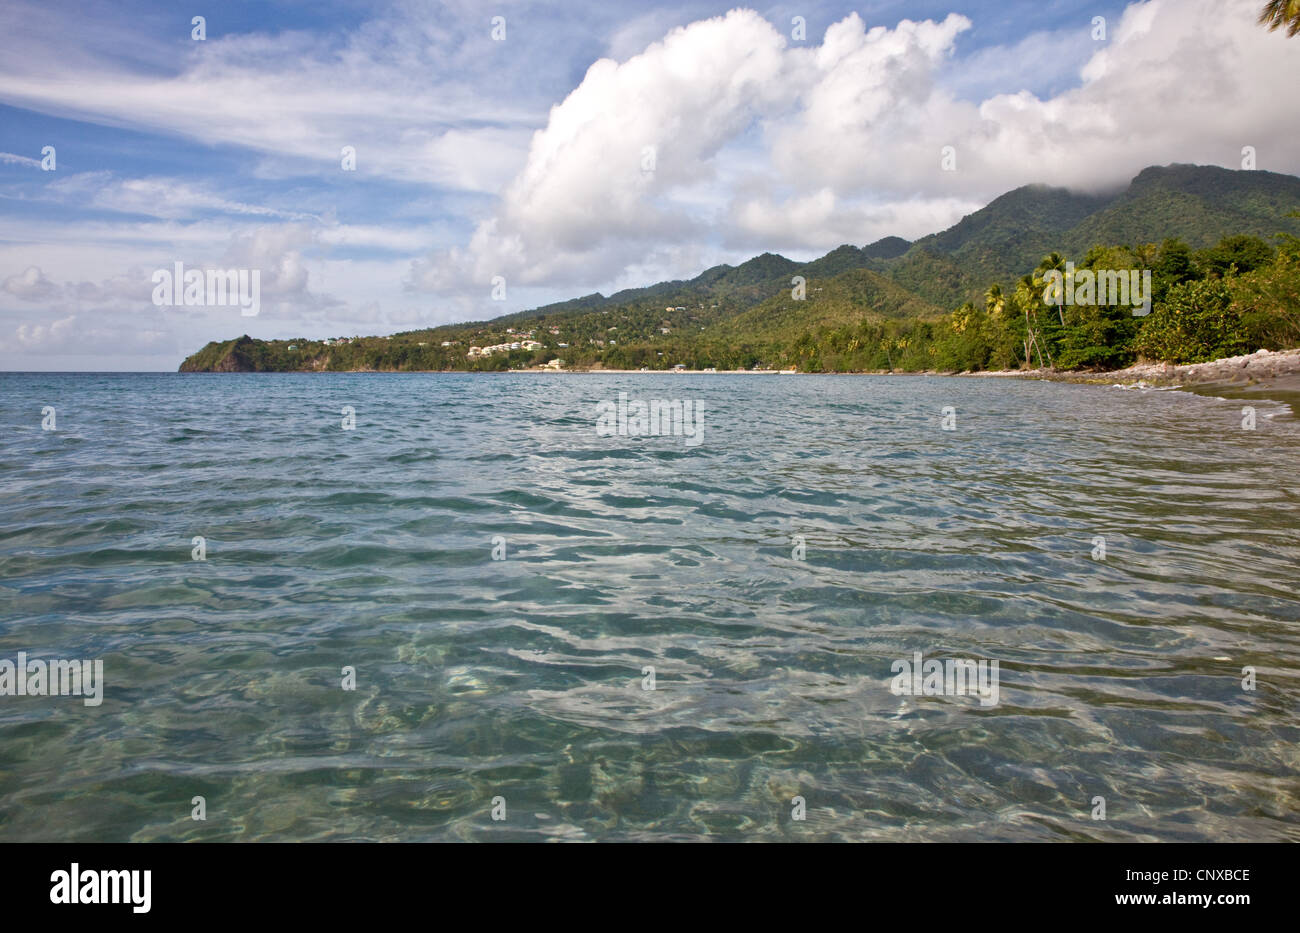 Douglas Bay and Morne aux Diables on the island of Dominica West Indies Stock Photo